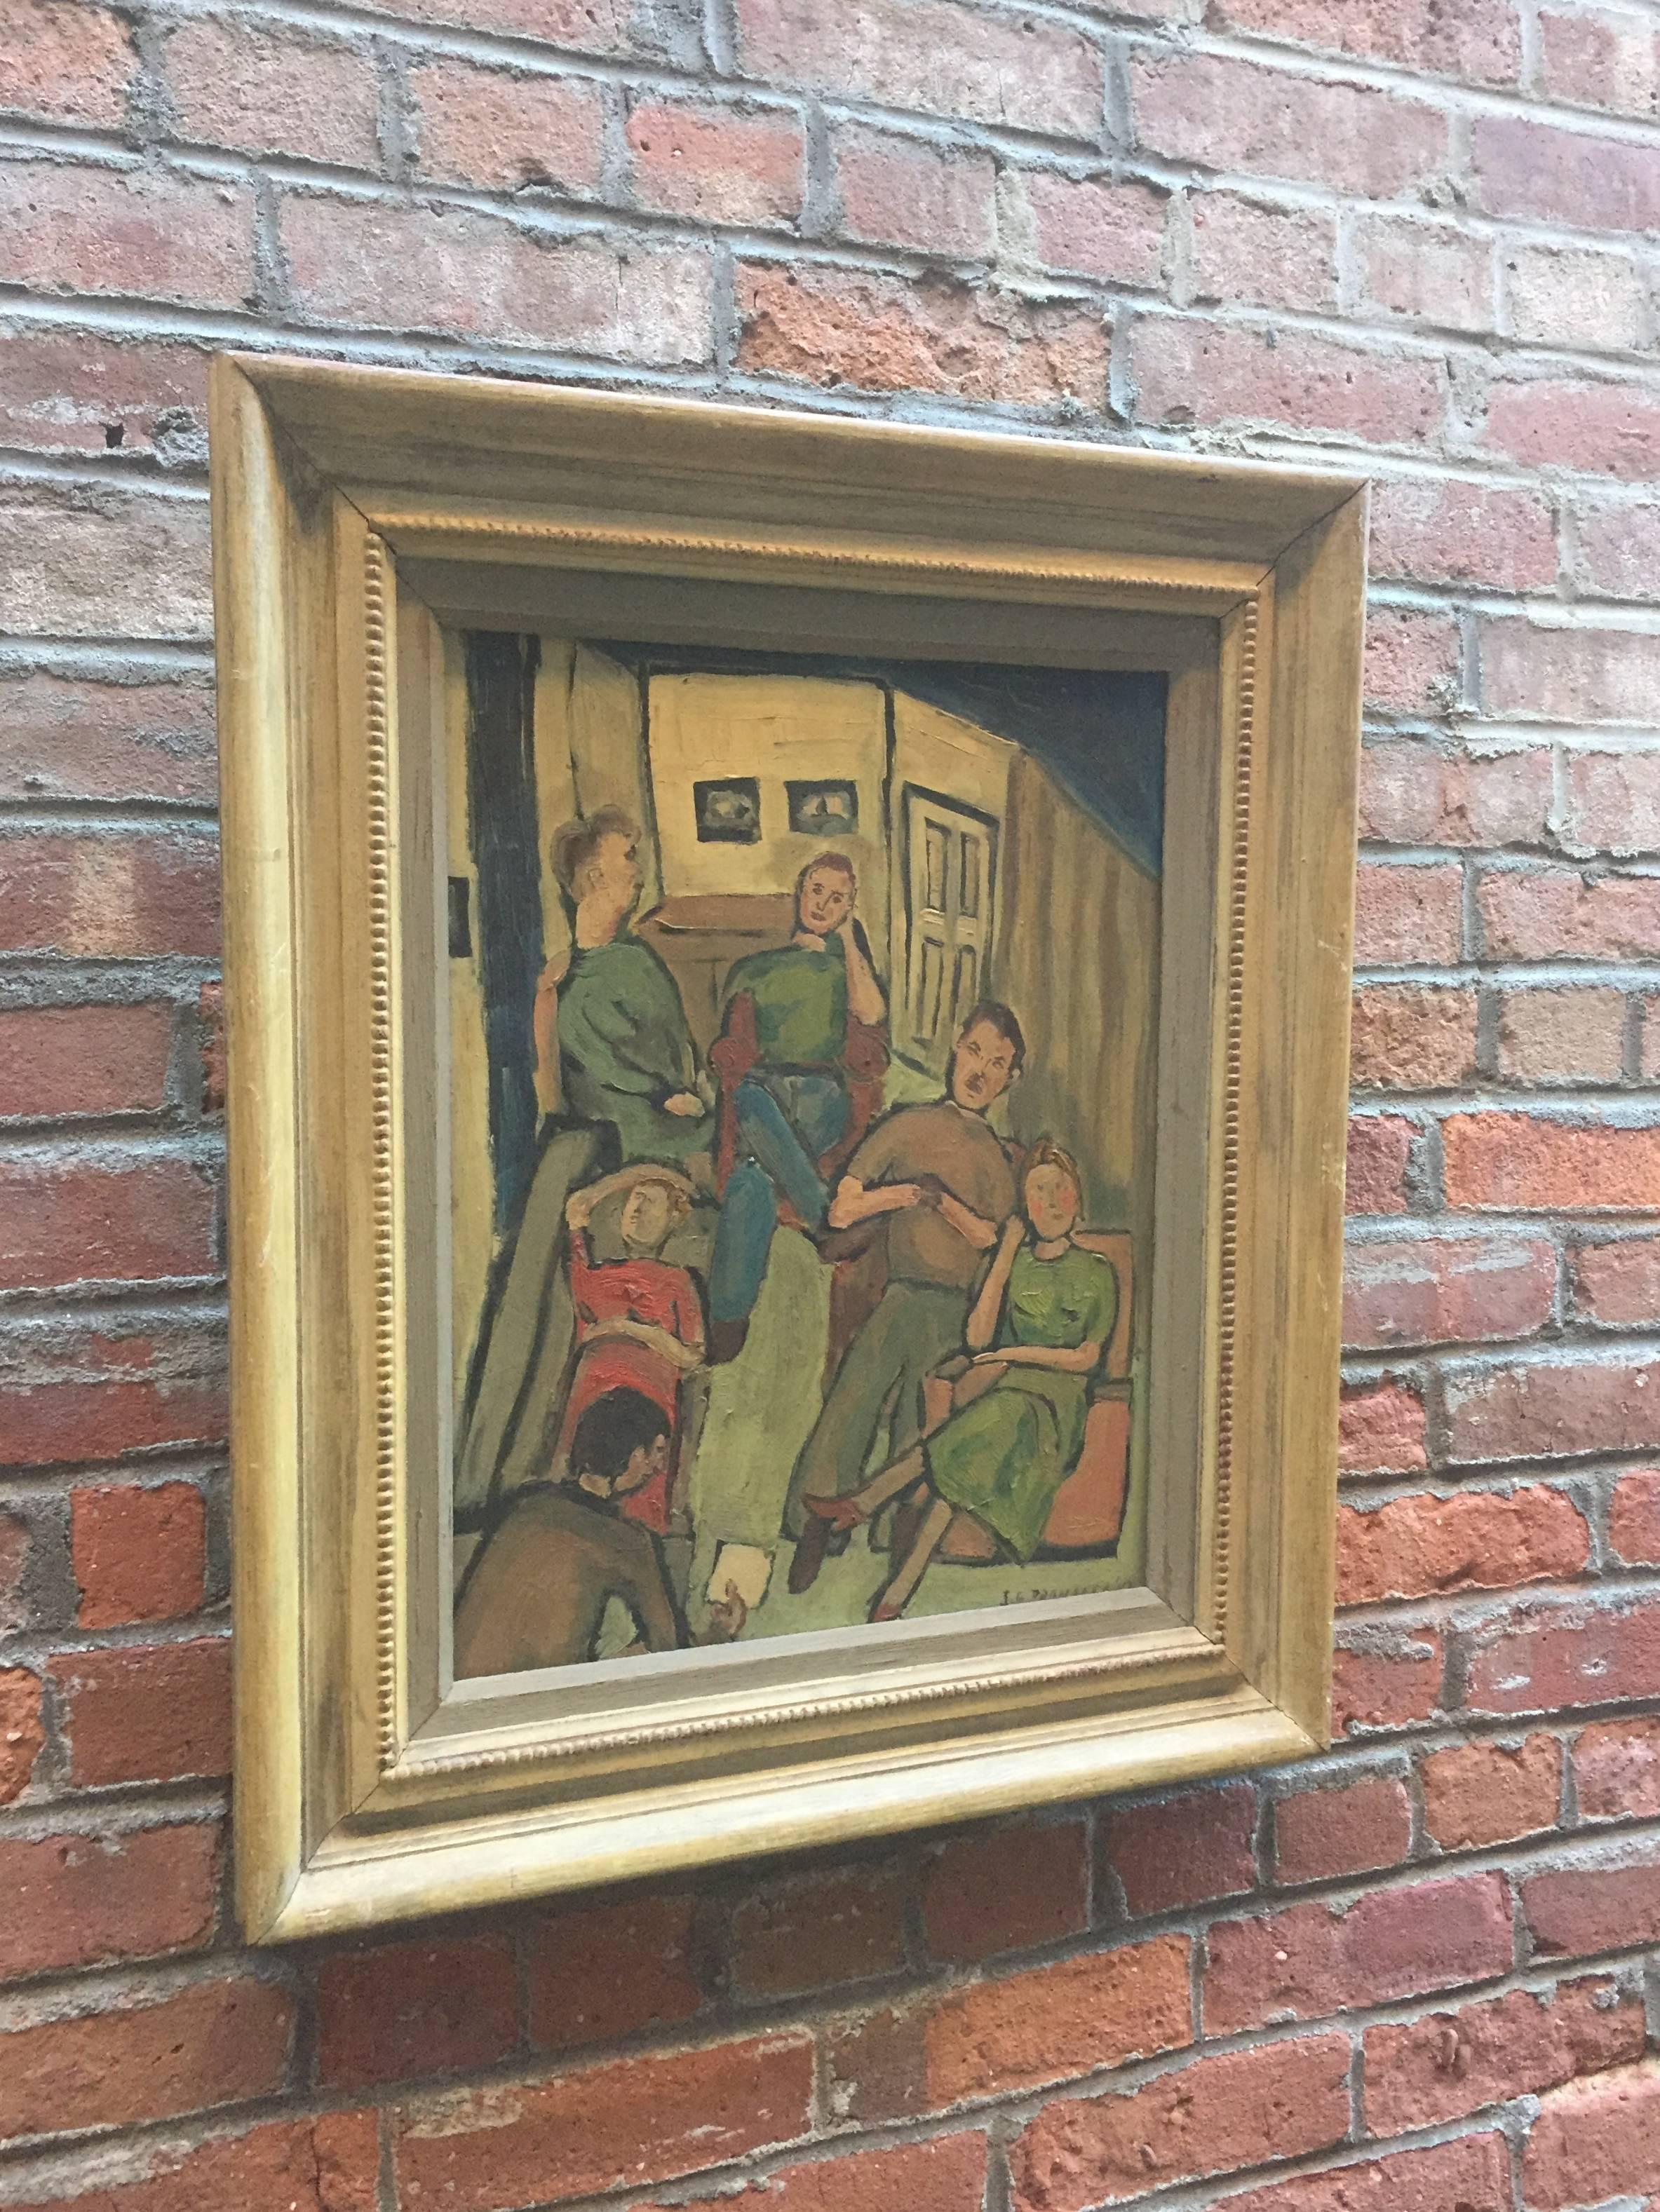 Wonderful New York School late 1940s oil painting on canvas board. Entitled verso, "The Reading" and numbered. Signed and lower right corner, JE Bromberg '47. Expressive brush work. Six seated, resting figures quietly listen to the reader